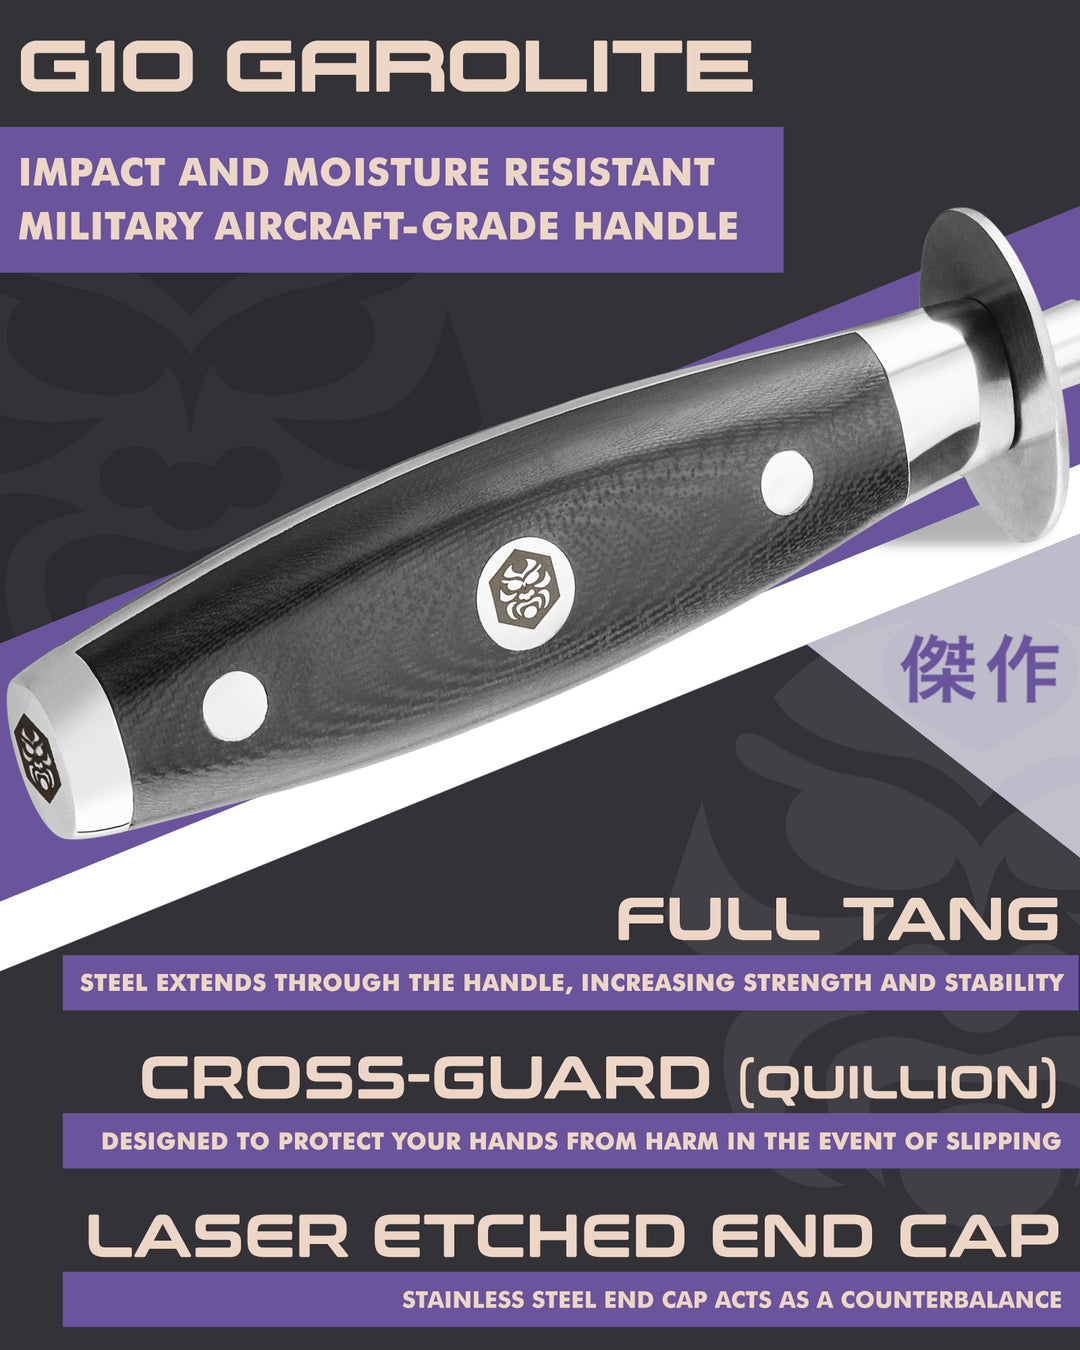 Kessaku Dynasty Honing Steel handle features: G10 handle, Cross Guard, full tang, contoured bolster, laser etched end cap